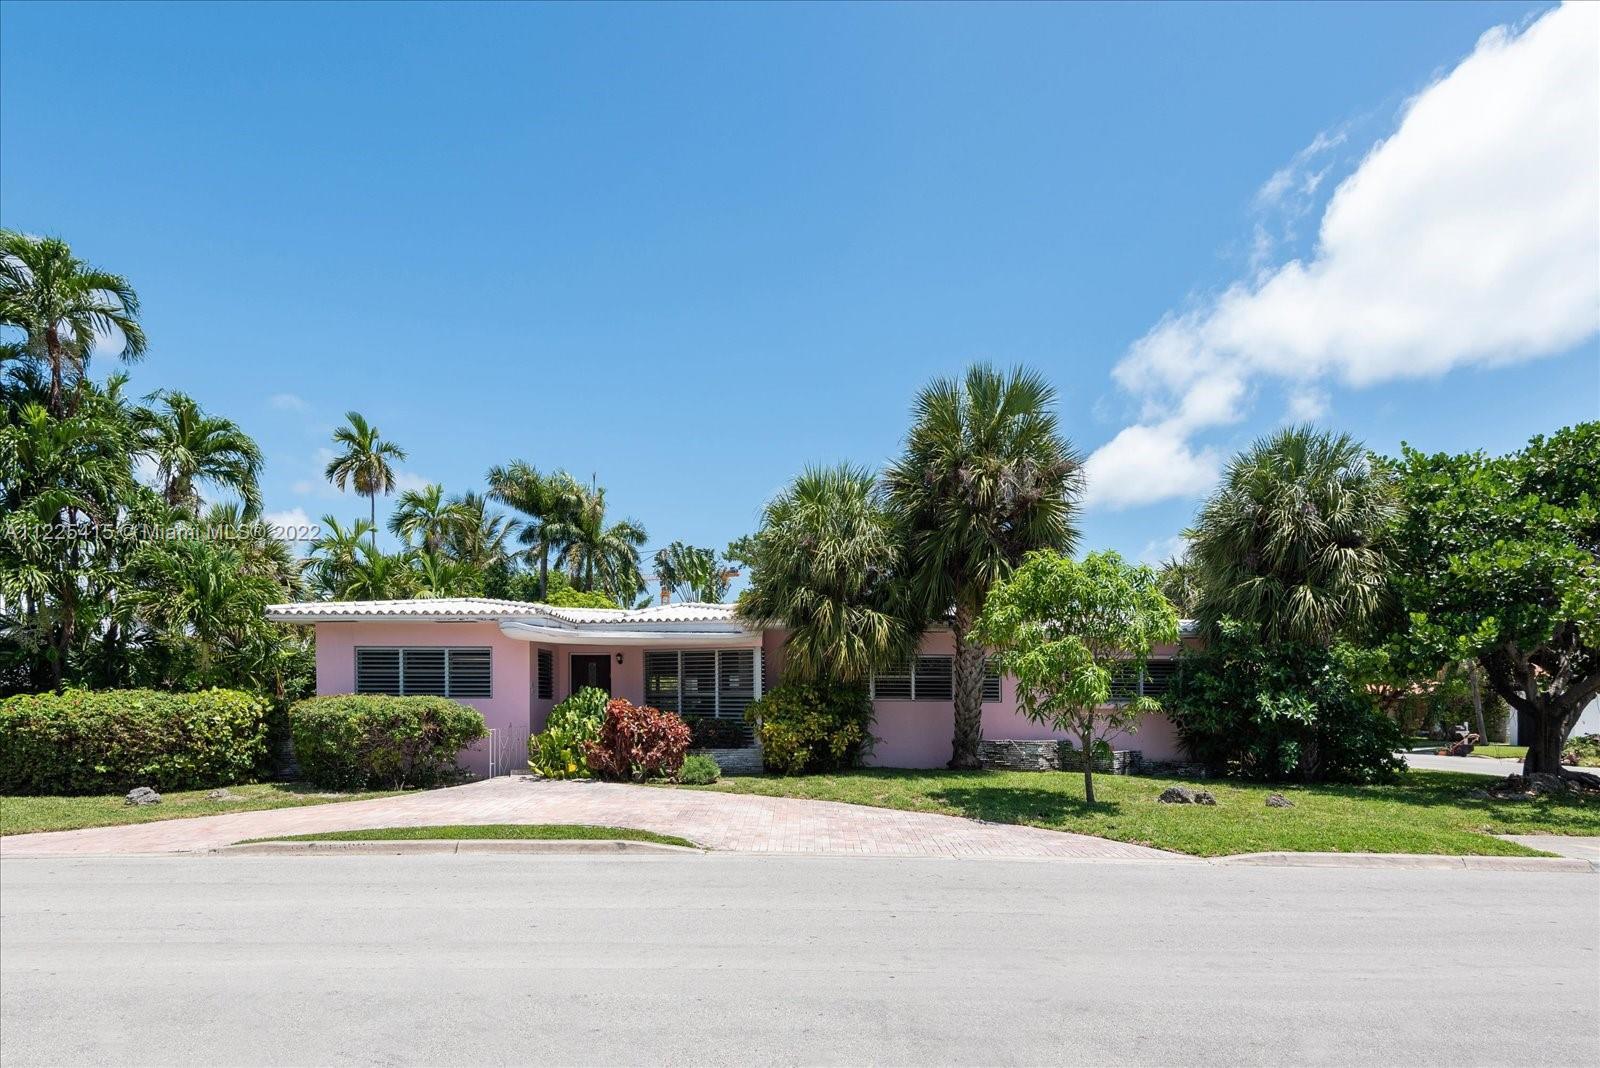 A CLASSIC FLORIDA HOME IN THE BEST LOCATION IN SURFSIDE!  95th Street and Byron, just a few blocks a